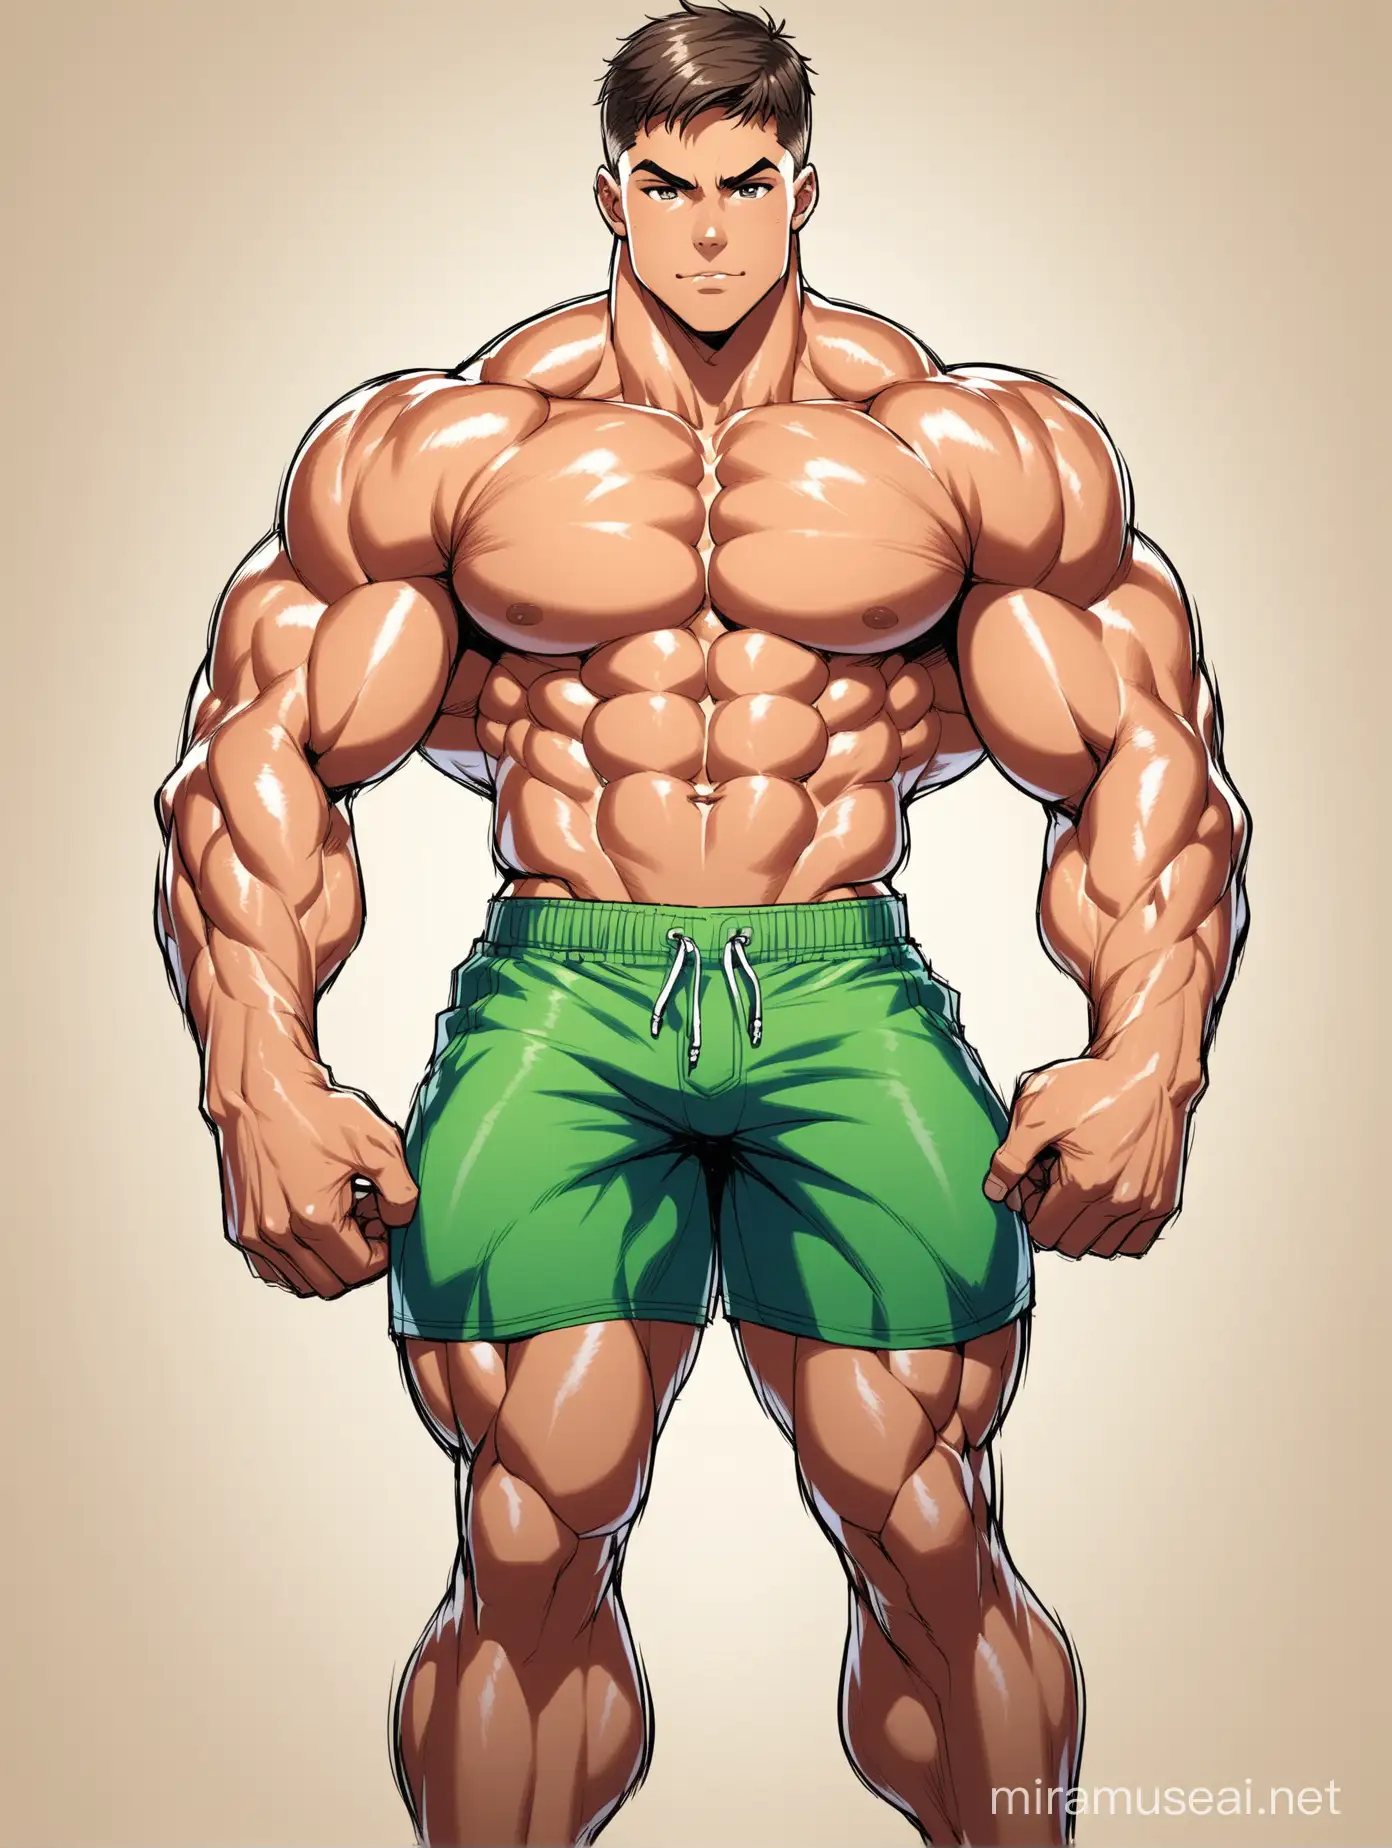 Muscular Teenage Male with a Delicate Face and Powerful Physique